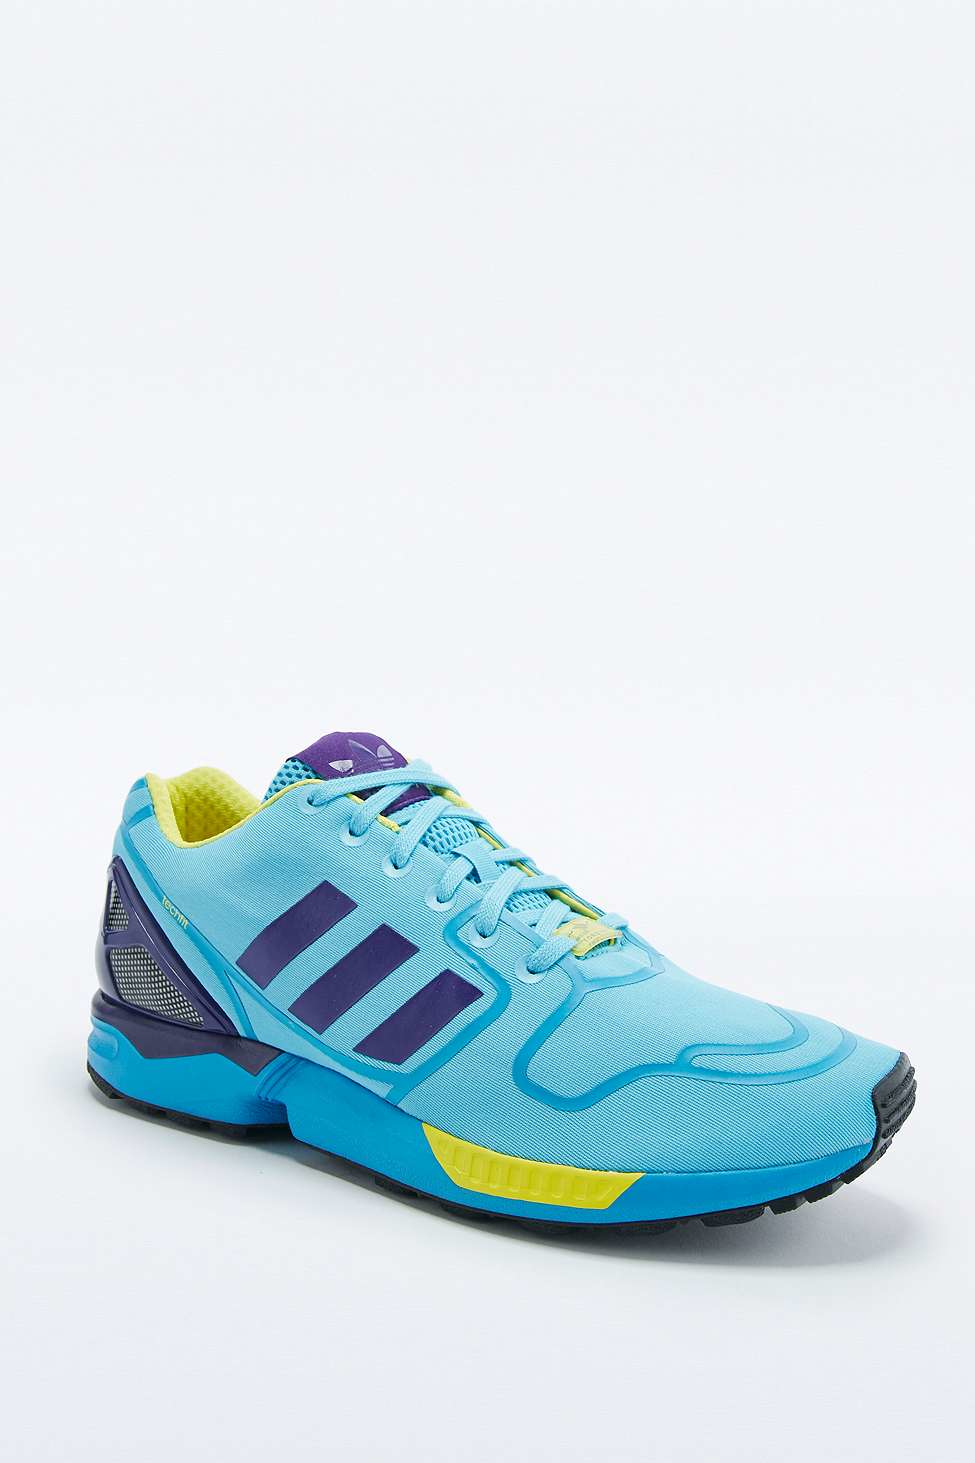 adidas Suede Zx Flux Bright Cyan Trainers in Turquoise (Blue) for Men - Lyst